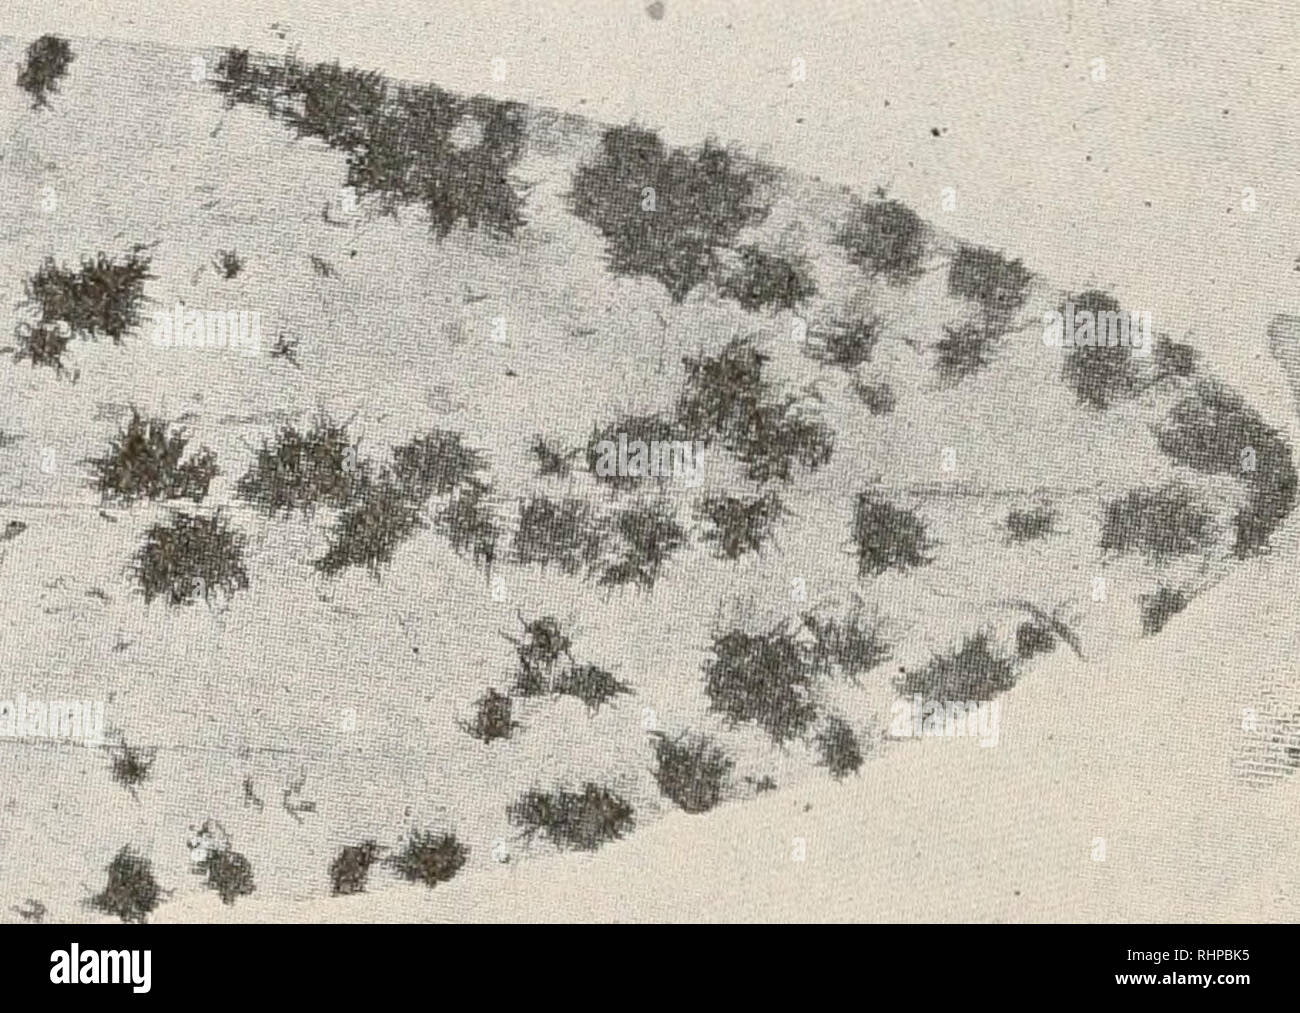 . The Biological bulletin. Biology; Zoology; Biology; Marine Biology. FIG. i. Leaf of Potamogeton showing scattered colonies of Folliculina. X3 diam. Photograph of preserved specimen. but there were very few large aggregates covering half the surface of a single leaf. Most leaves had none, some leaves had many scattered individuals. On the stems there were noticeable numbers of the small form of sac. The occurrence on leaves seemed entirely arbitrary as if from settlements of swimmers: the Folliculina was not now crowded toward the tips of the sprays but scattered along many inches of the spra Stock Photo